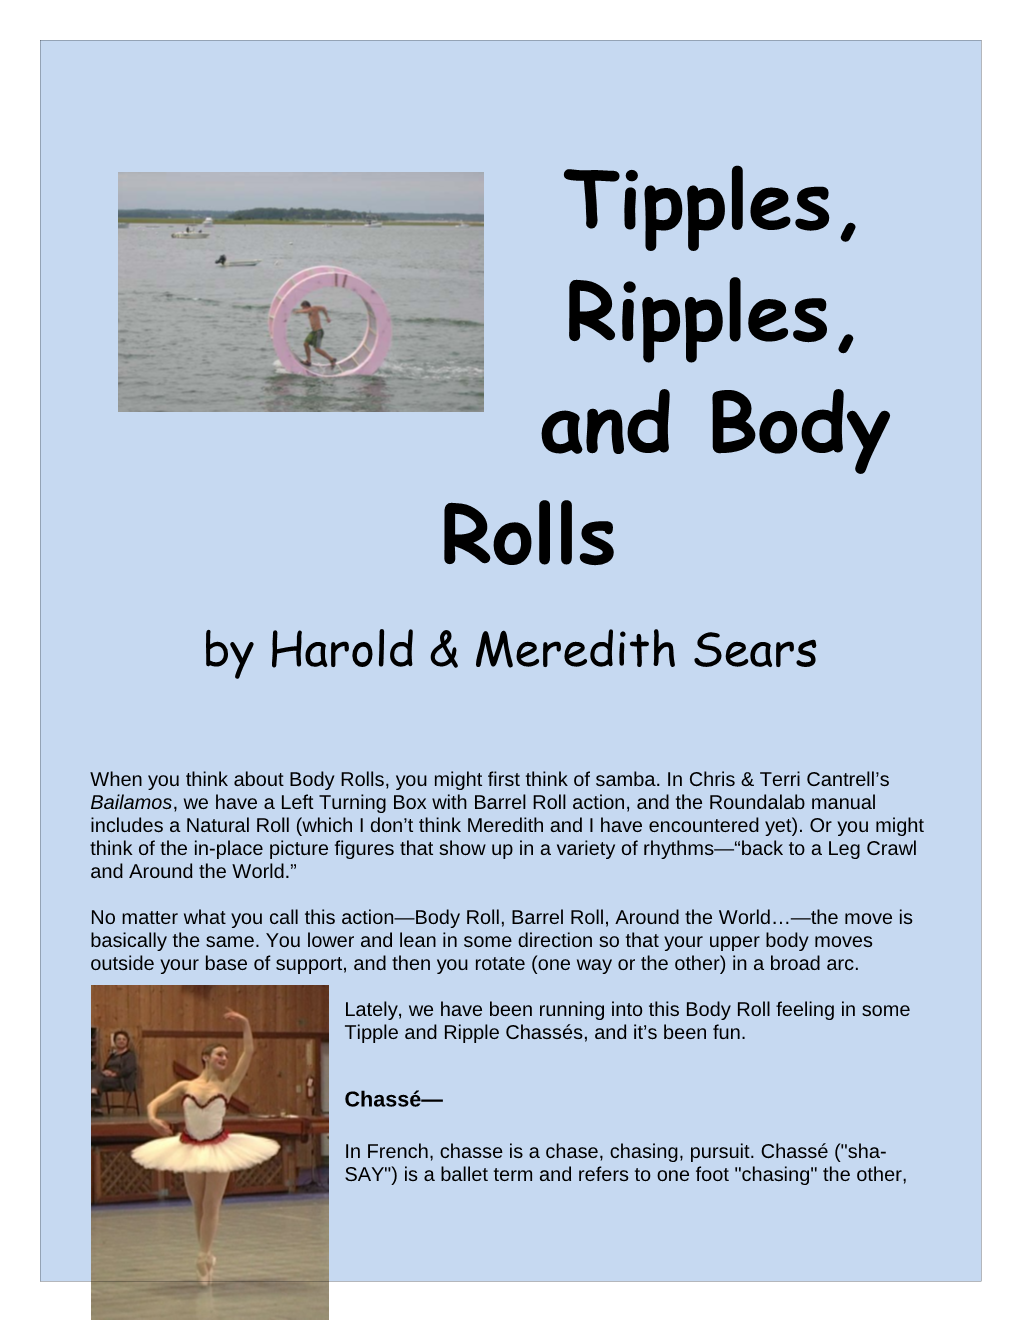 Tipples, Ripples, and Body Rolls